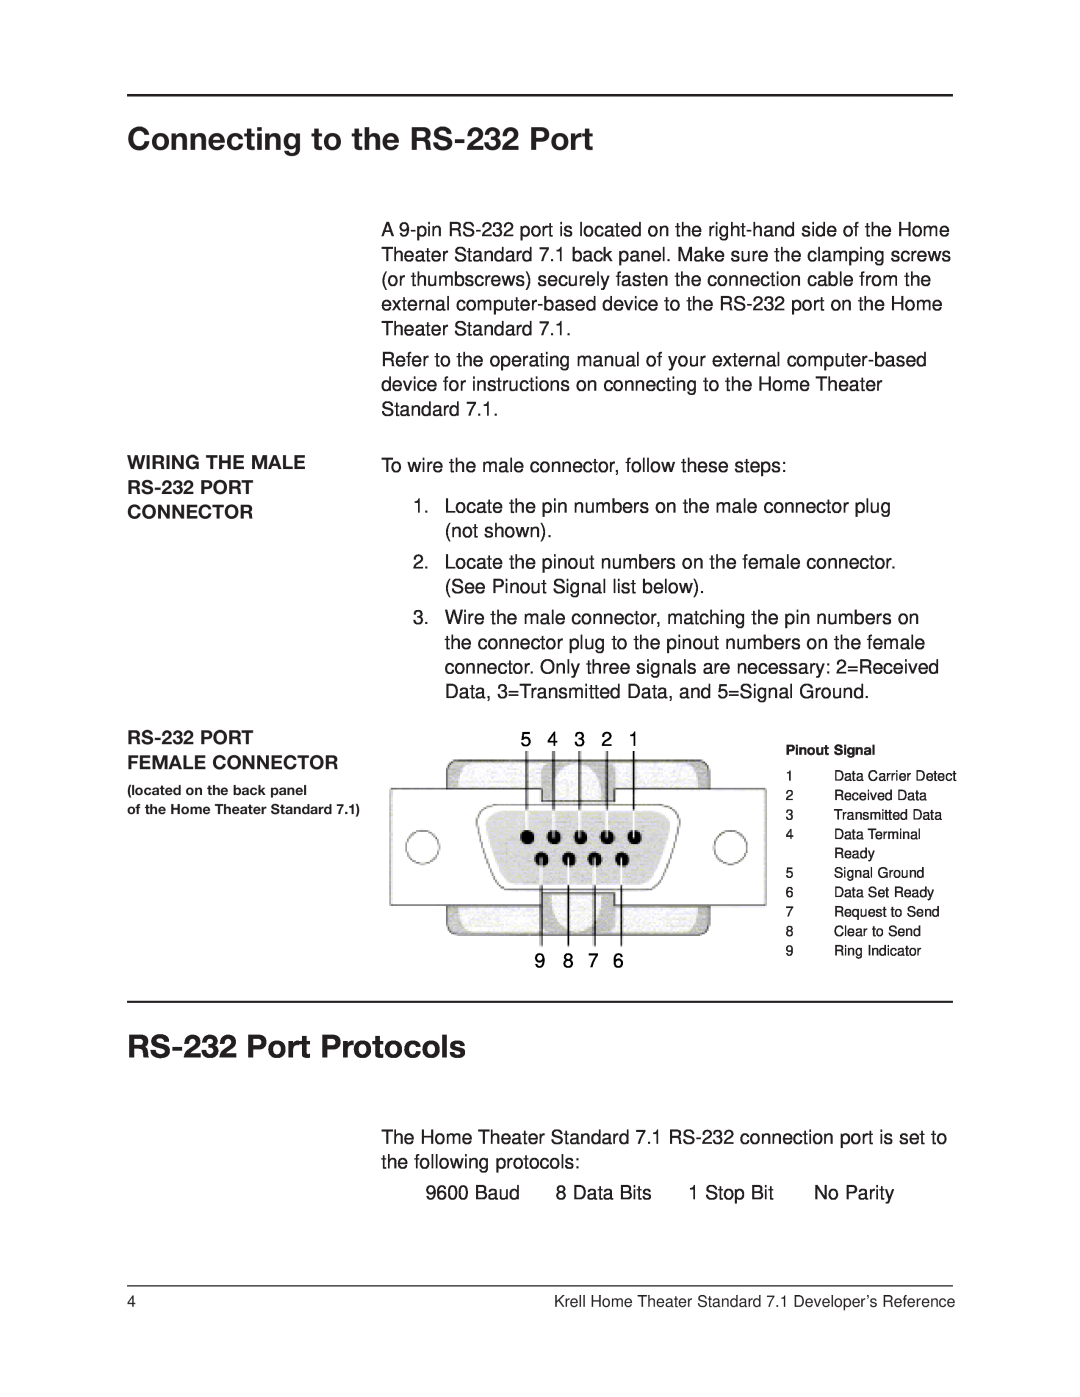 Krell Industries RC-5 manual Connecting to the RS-232Port, RS-232Port Protocols, WIRING THE MALE RS-232PORT CONNECTOR 